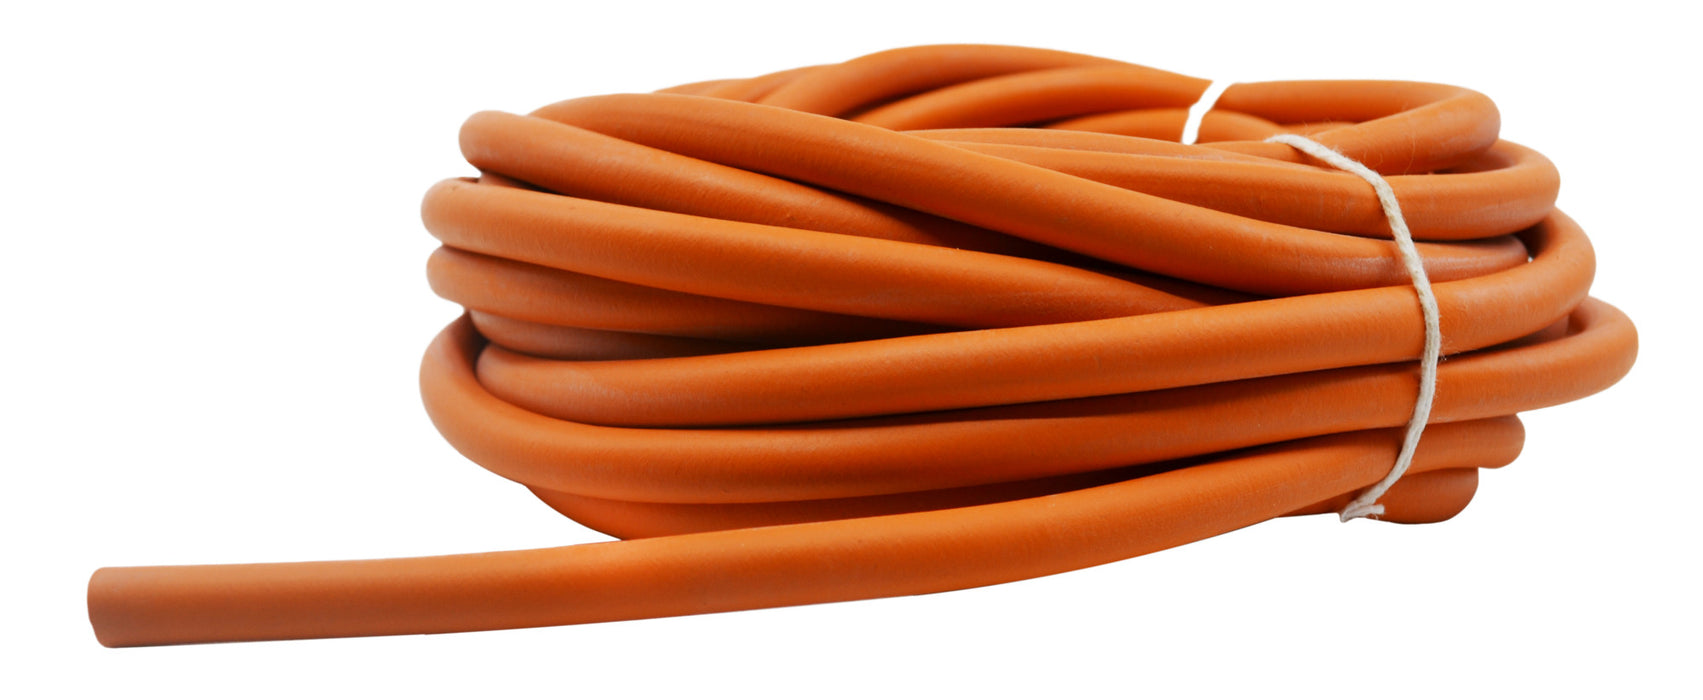 Rubber Tubing, 10m, Orange - Soft - 5mm Bore - 1.5mm Thickness